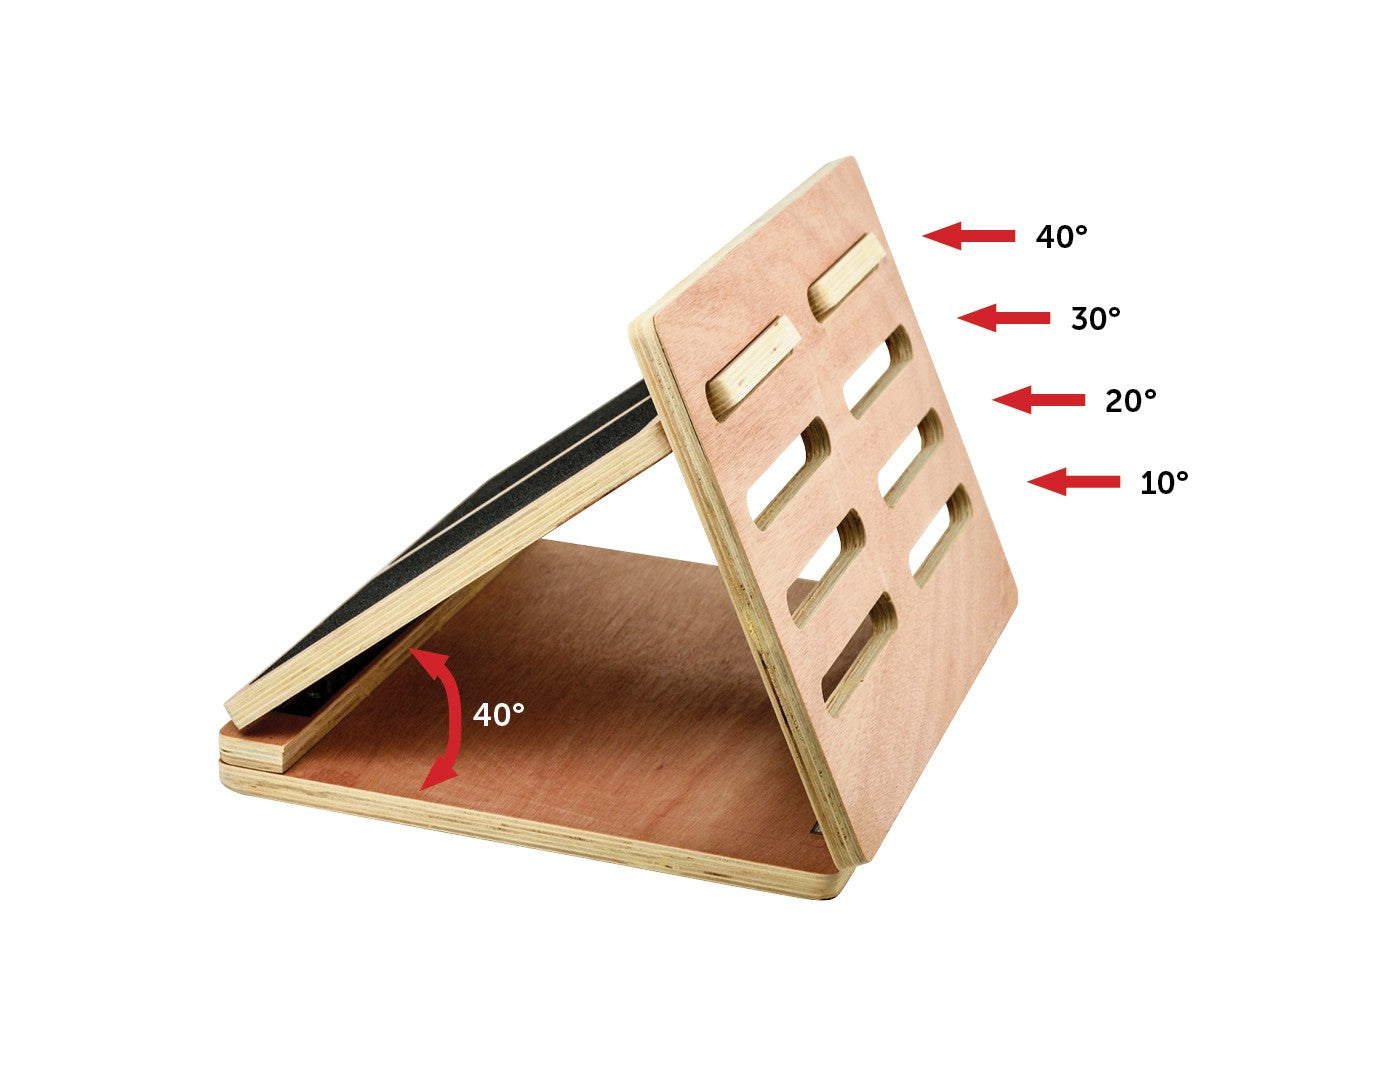 Slant Board Calf Stretcher as used in the Egoscue Method